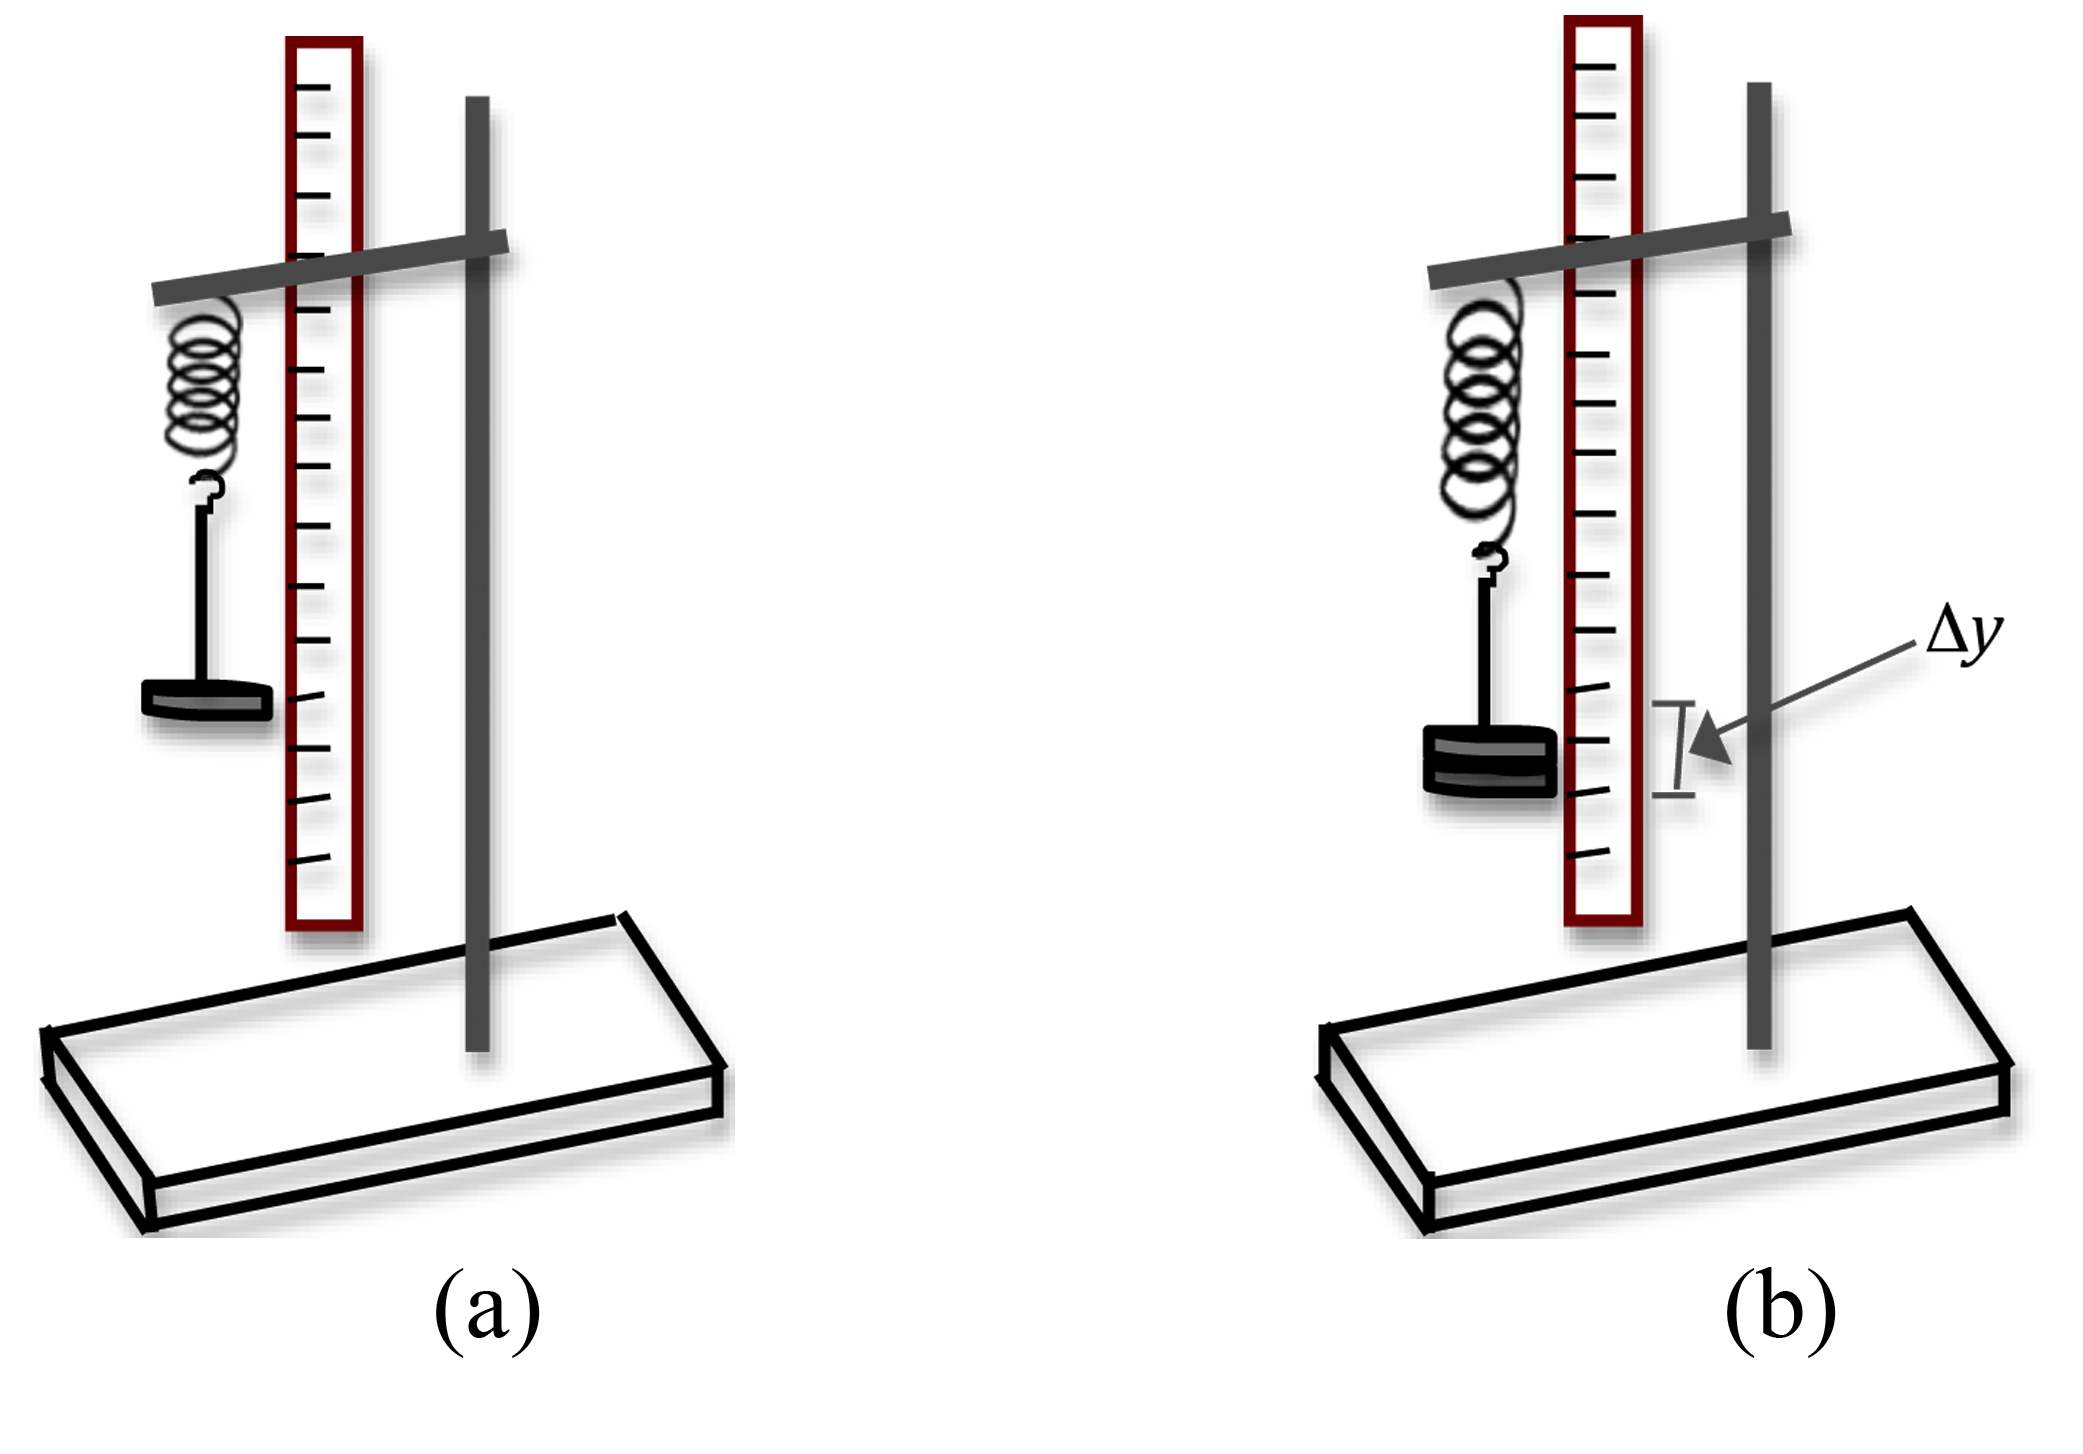 4a is diagram image of weight hanger on spring suspended from stand next to ruler. 4b is image weight placed in weight hanger, displaying an extra extension of delta-y.